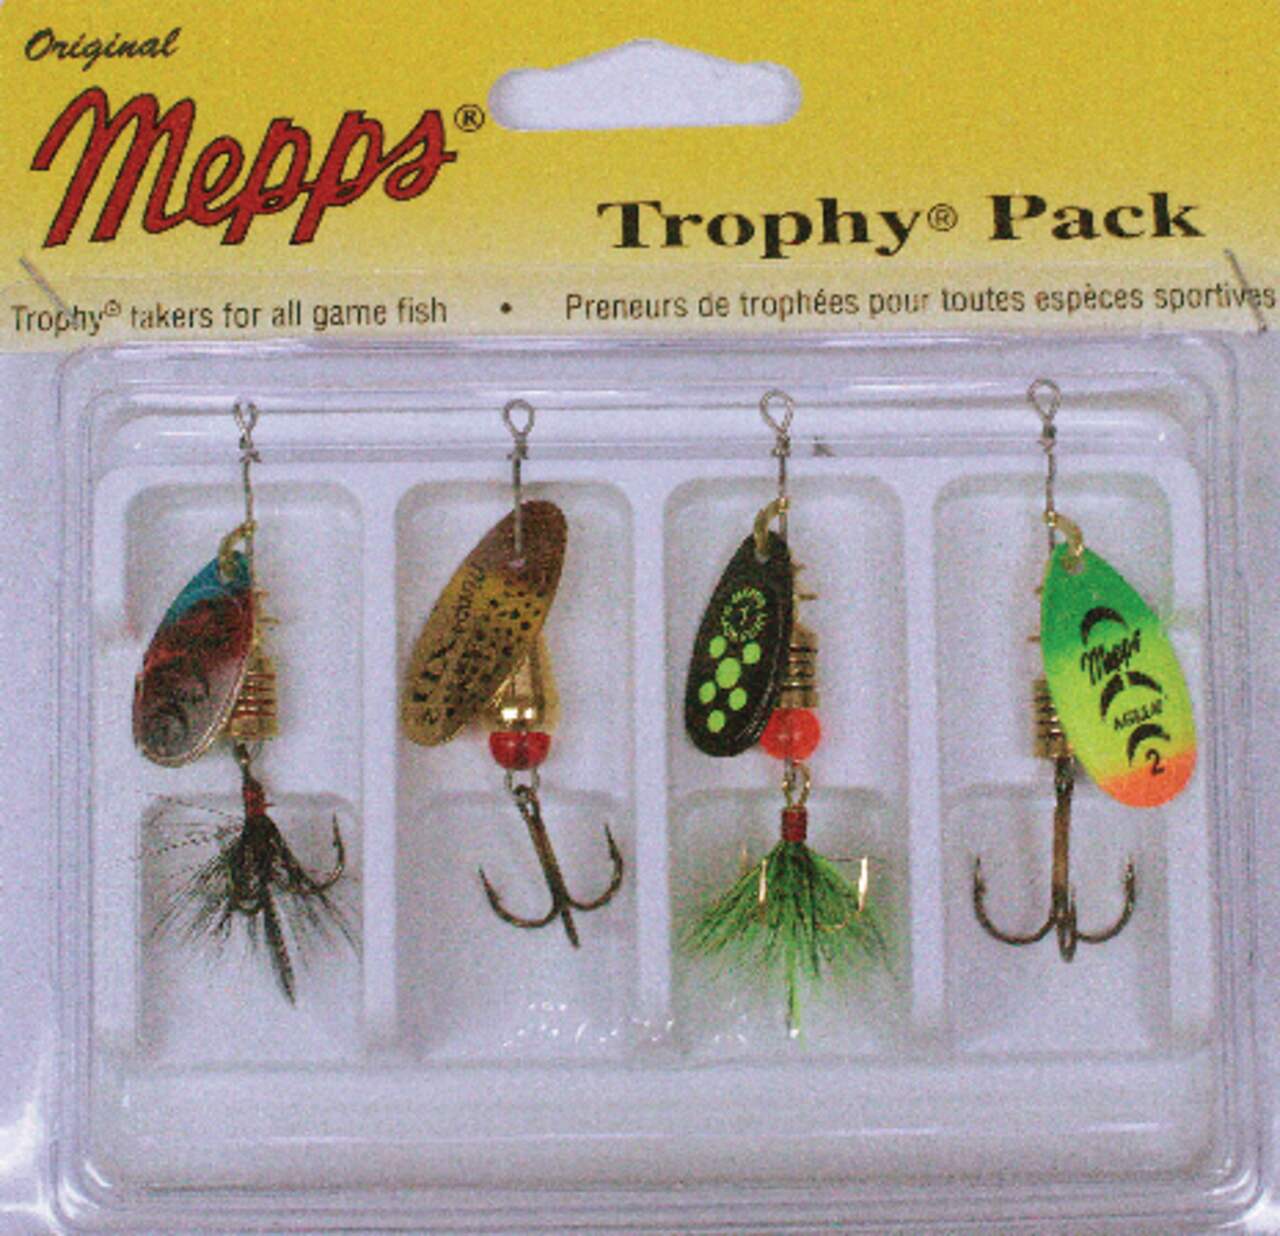 https://media-www.canadiantire.ca/product/playing/fishing/fishing-lures/0781856/brecks-spinner-trophy-kit-4-pack-1-2-5a5a18dd-3b61-4a92-8441-063559fea340.png?imdensity=1&imwidth=640&impolicy=mZoom